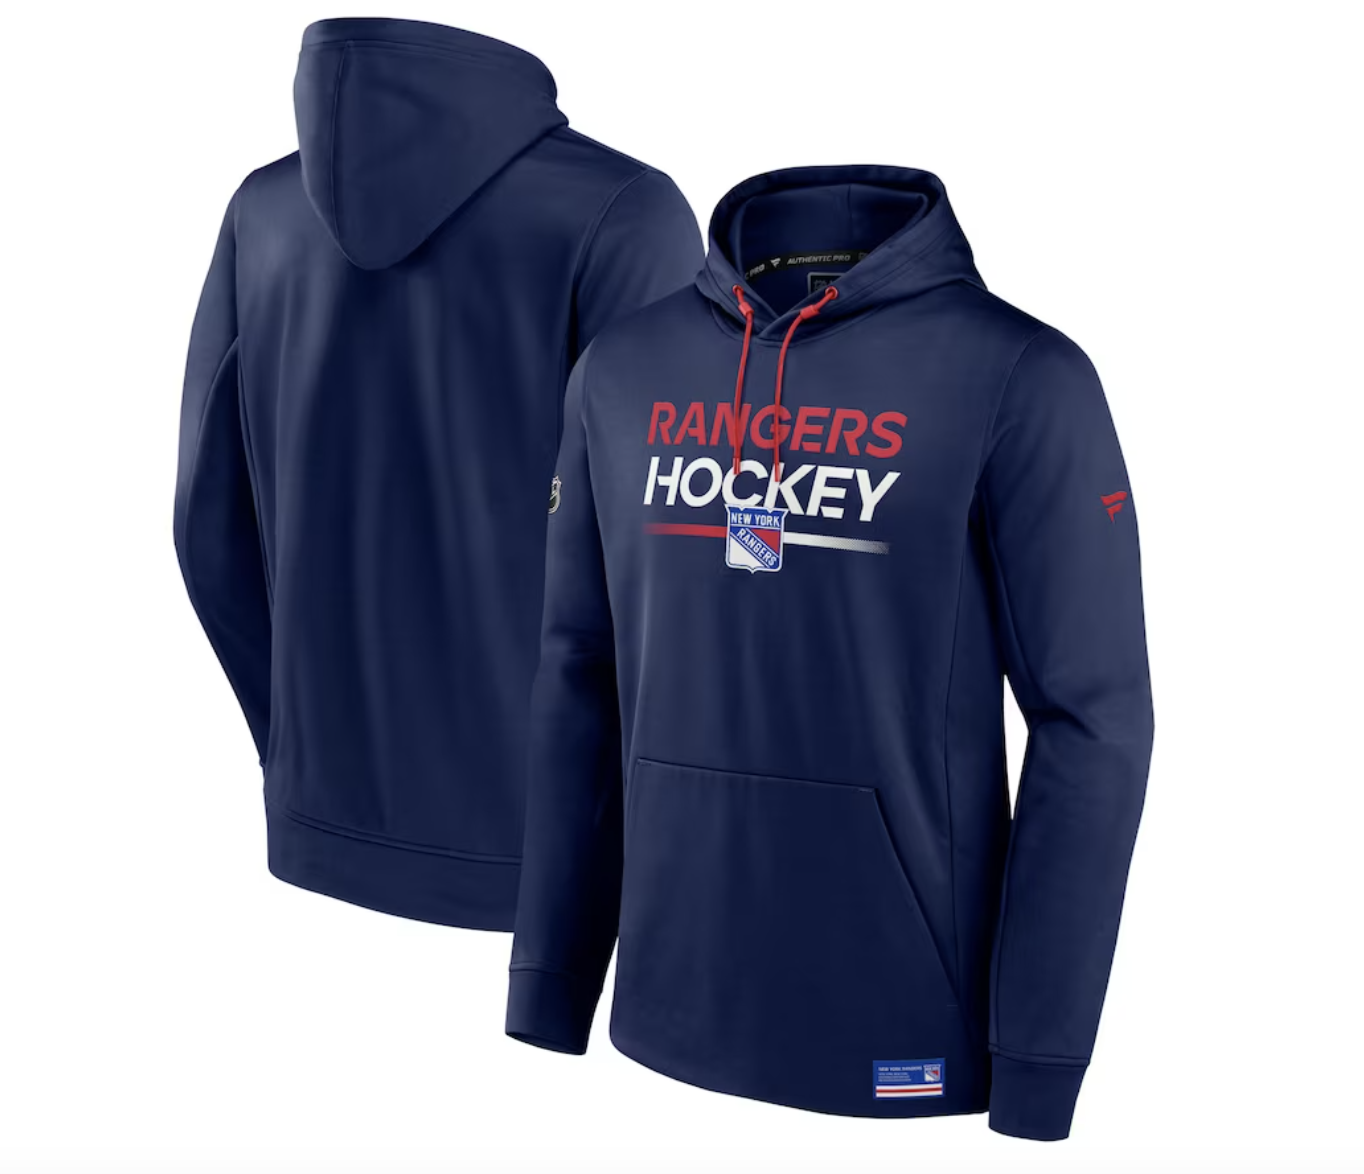 NHL Authentic Pro gear: Where to buy 2023 performance hoodies, hats,  training apparel the pros wear 